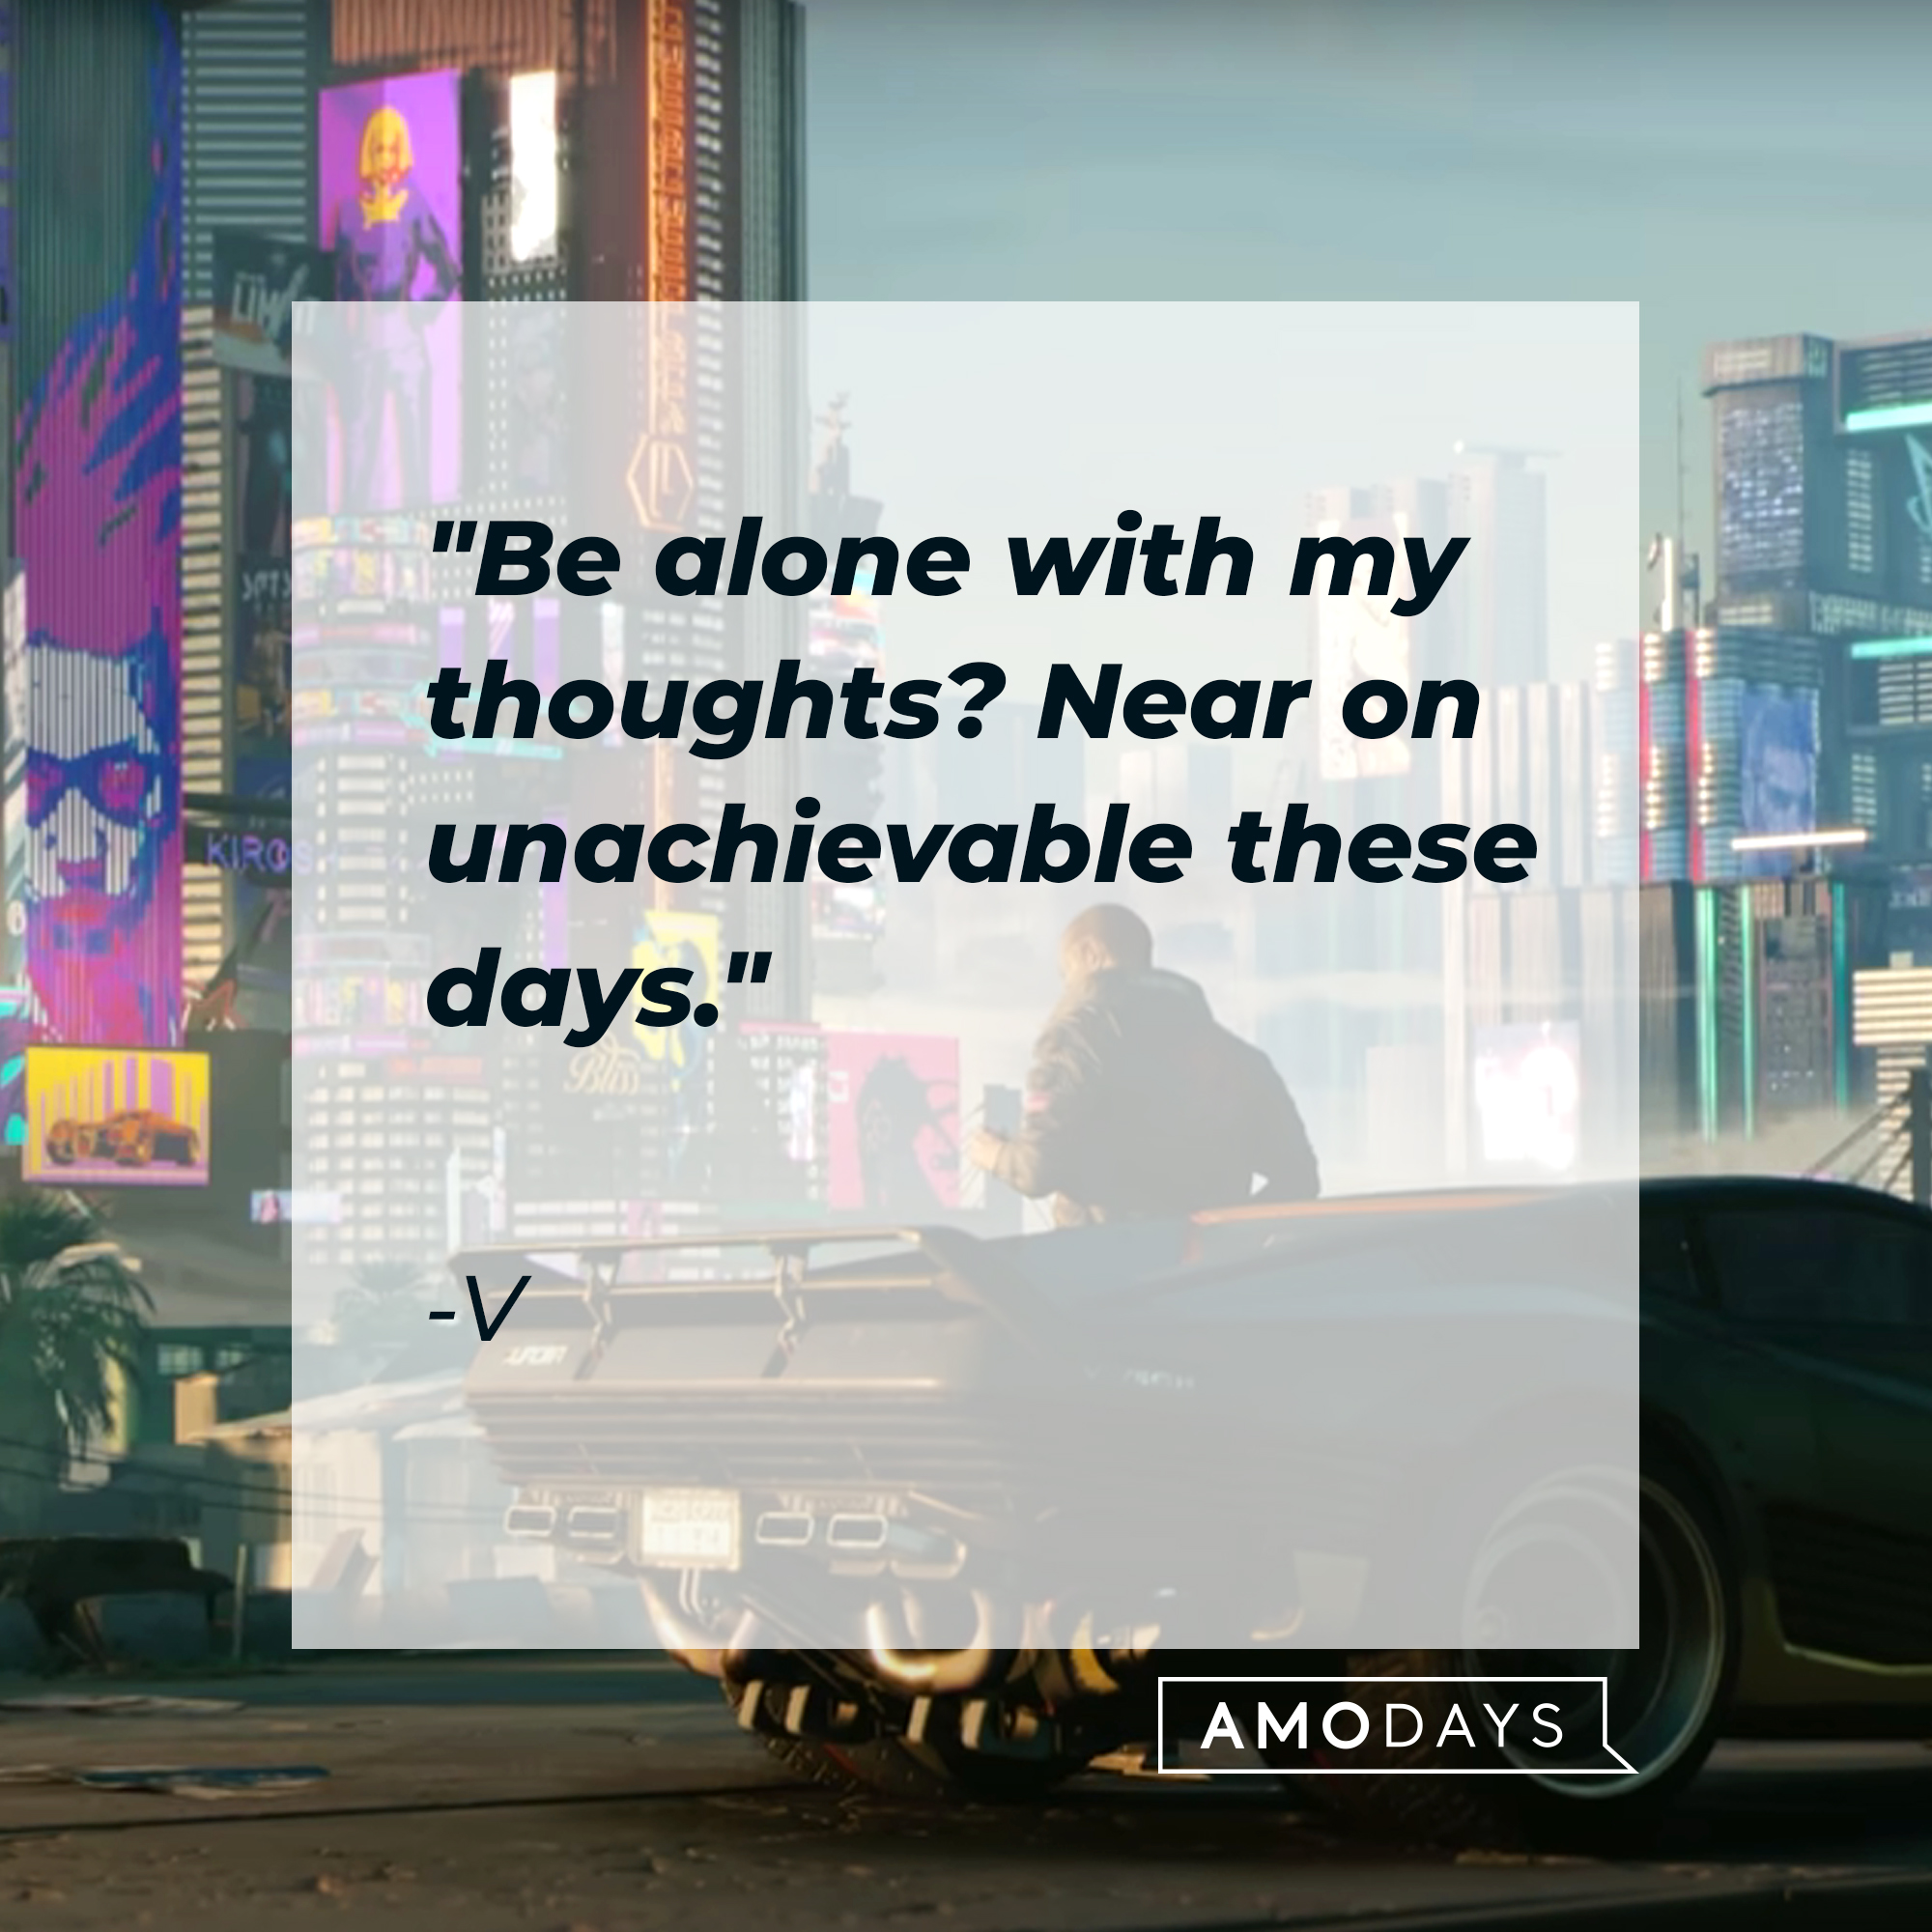 V's quote: "Be alone with my thoughts? Near on unachievable these days." | Source: youtube.com/CyberpunkGame